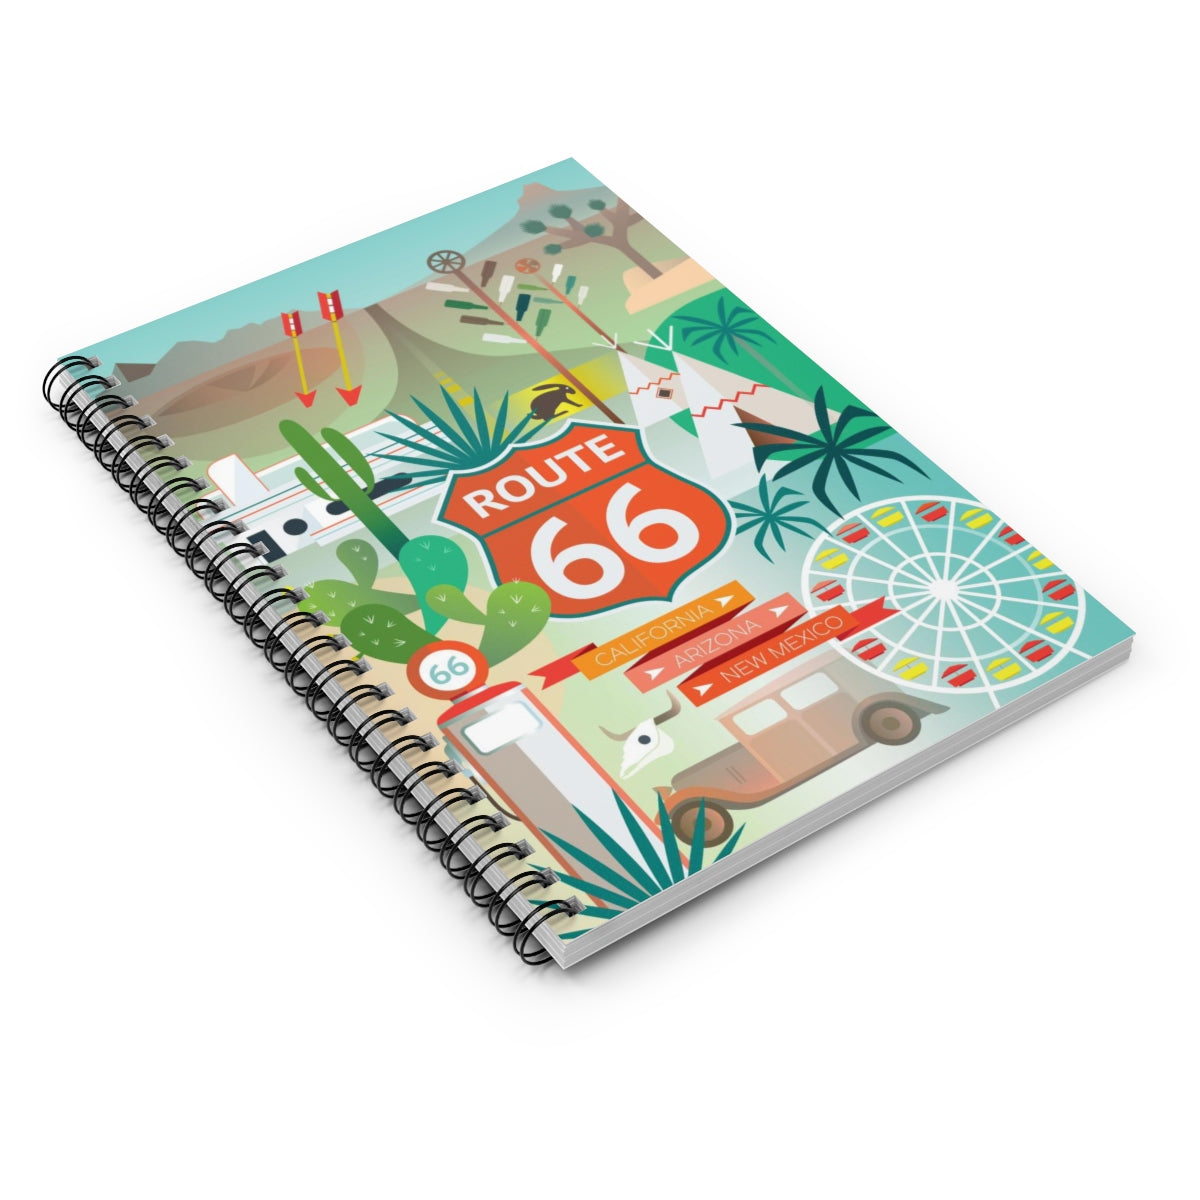 ROUTE 66 JOURNAL